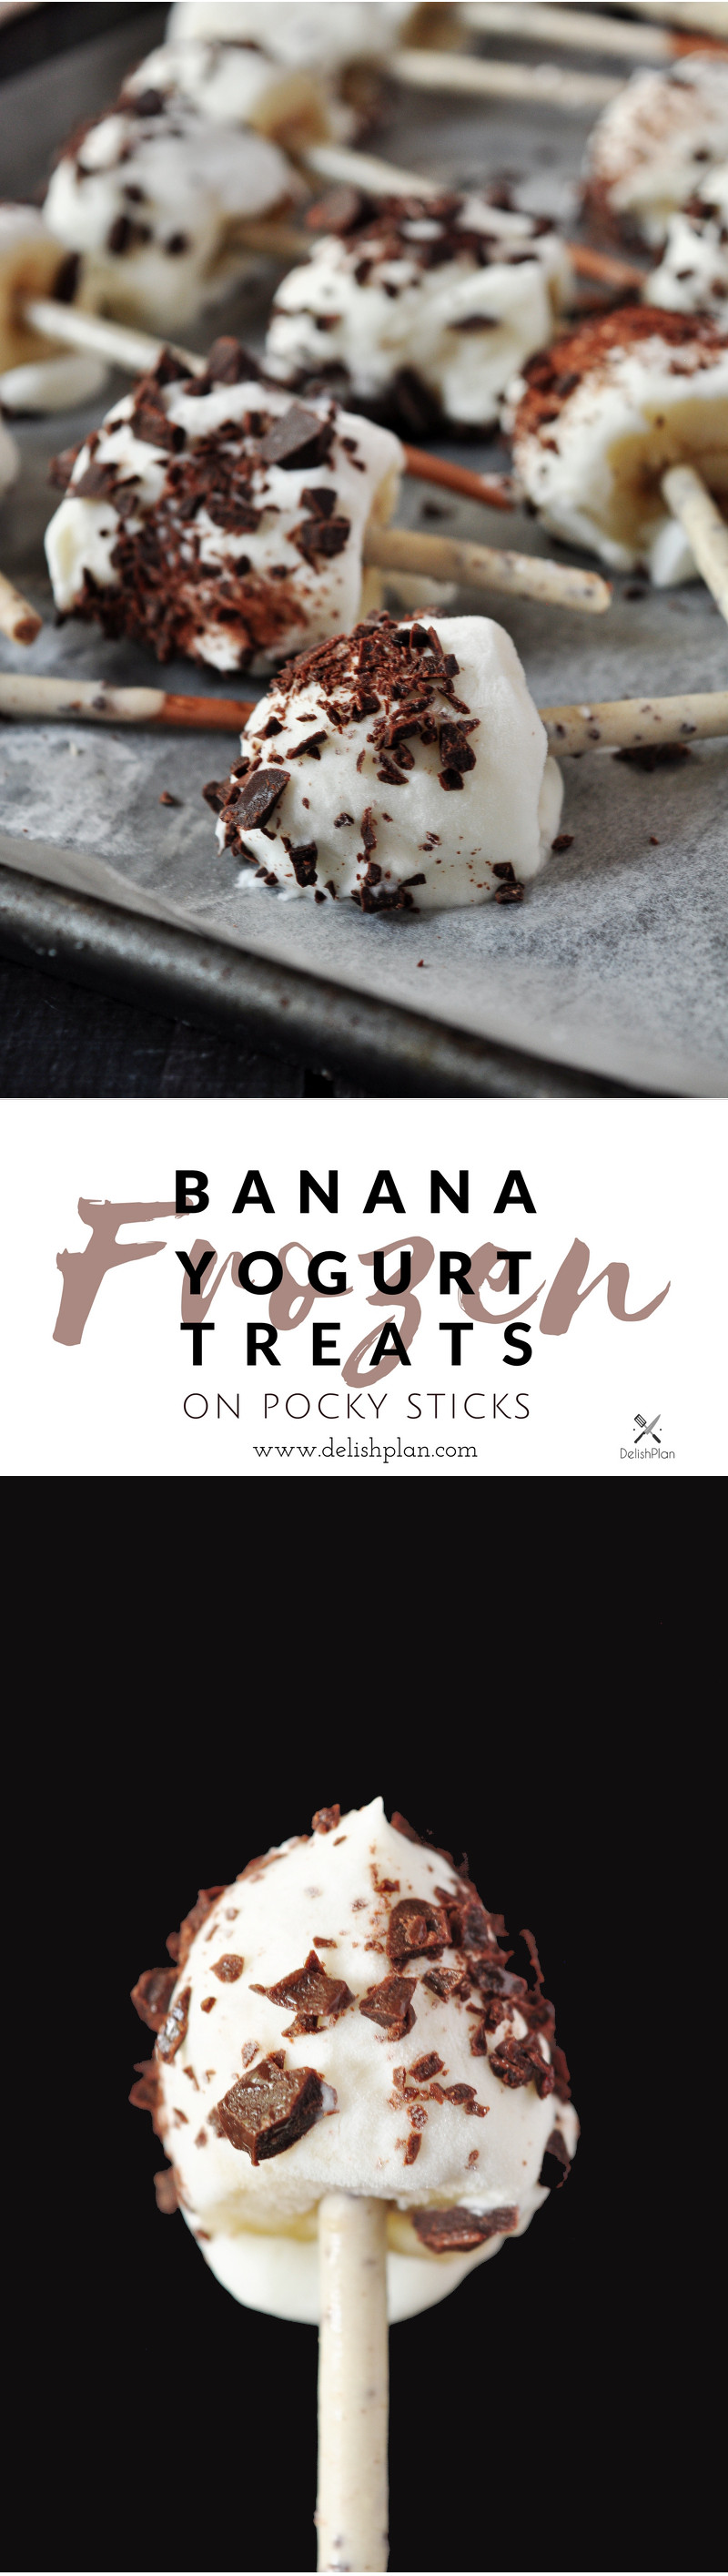 Bananas on Pocky sticks, coated with yogurt and sprinkled with chopped chocolate, these adorable banana yogurt frozen treats are super fun and easy to make.